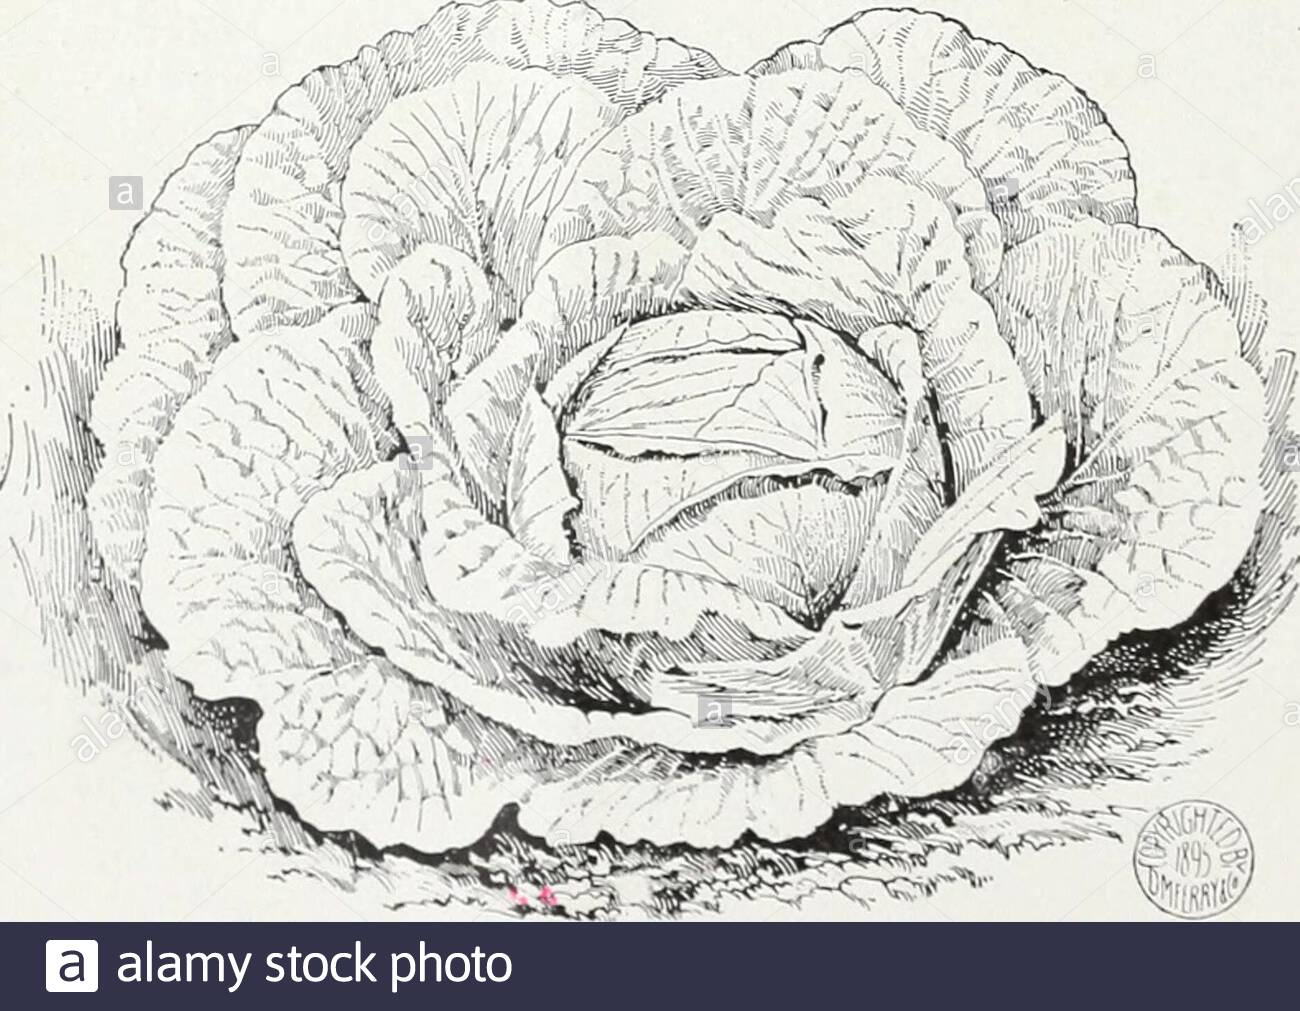 wholesale price list of seeds 1897 chariton 1 savov drumhead fi c charlotte hollander cabbage this is one of the hardii in cultivation and endures both frost and drouth that would destroy other varieties i is i onsfdered by many the best cabbage to hold over lor springmarkets wholesale prlce llst 1897 13 carrot tel cipher per lb earliest short horn for forcing w 39 chase t10 early scarlet horn jlotv chattooga so 2 s early half long scarlet carentan corelessxh vv chautauqua ho y half long scarlet nantes stump rooted 2v v che 2AN7T9G